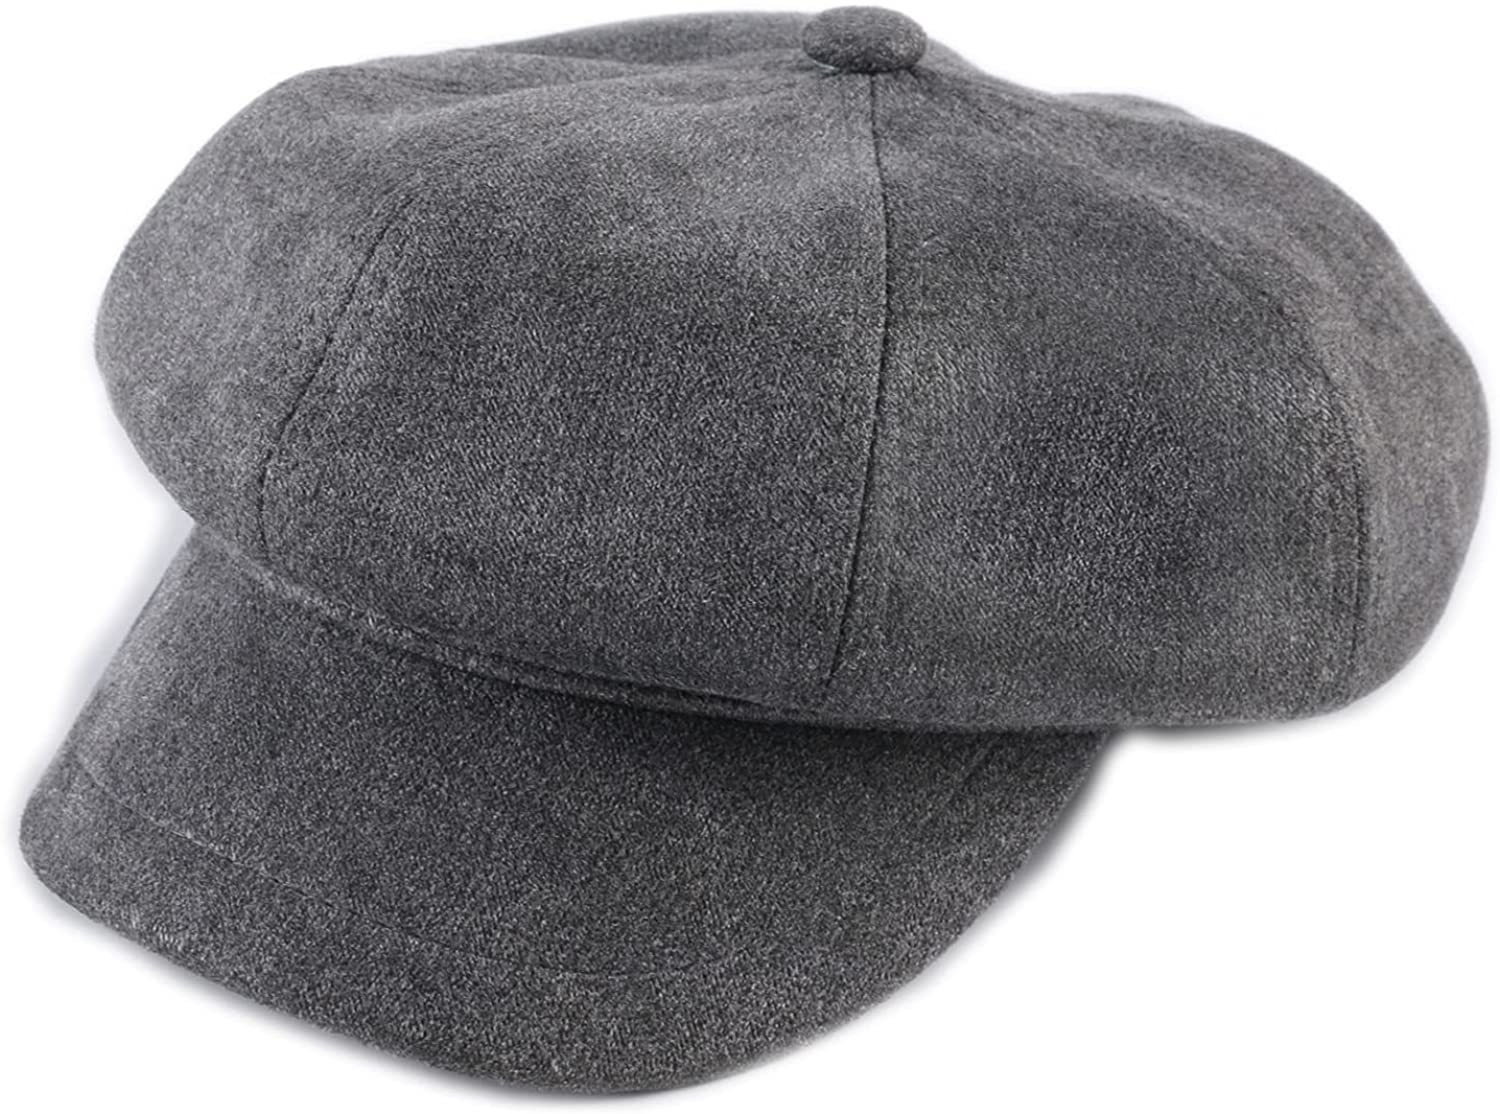 Suede Plain Color Newsboy Cap for Women Adjusted Thick Paperboy Hat Ladies Pleated Warm Octagonal Hats